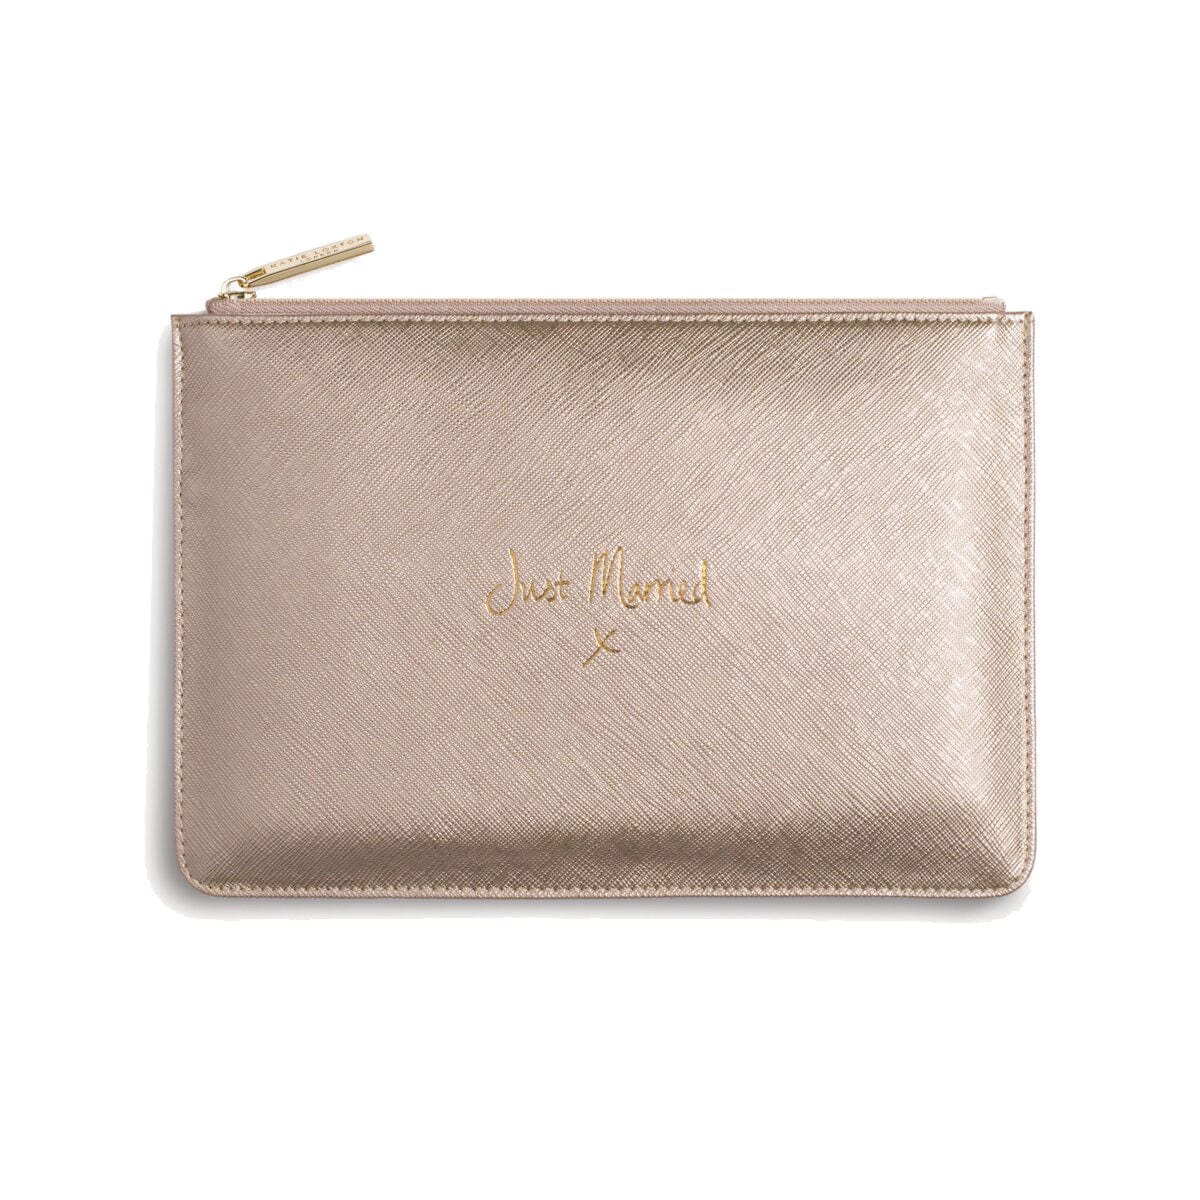 Katie Loxton Perfect Pouch Katie Loxton Perfect Pouch - Just Marries - Metallic Gold